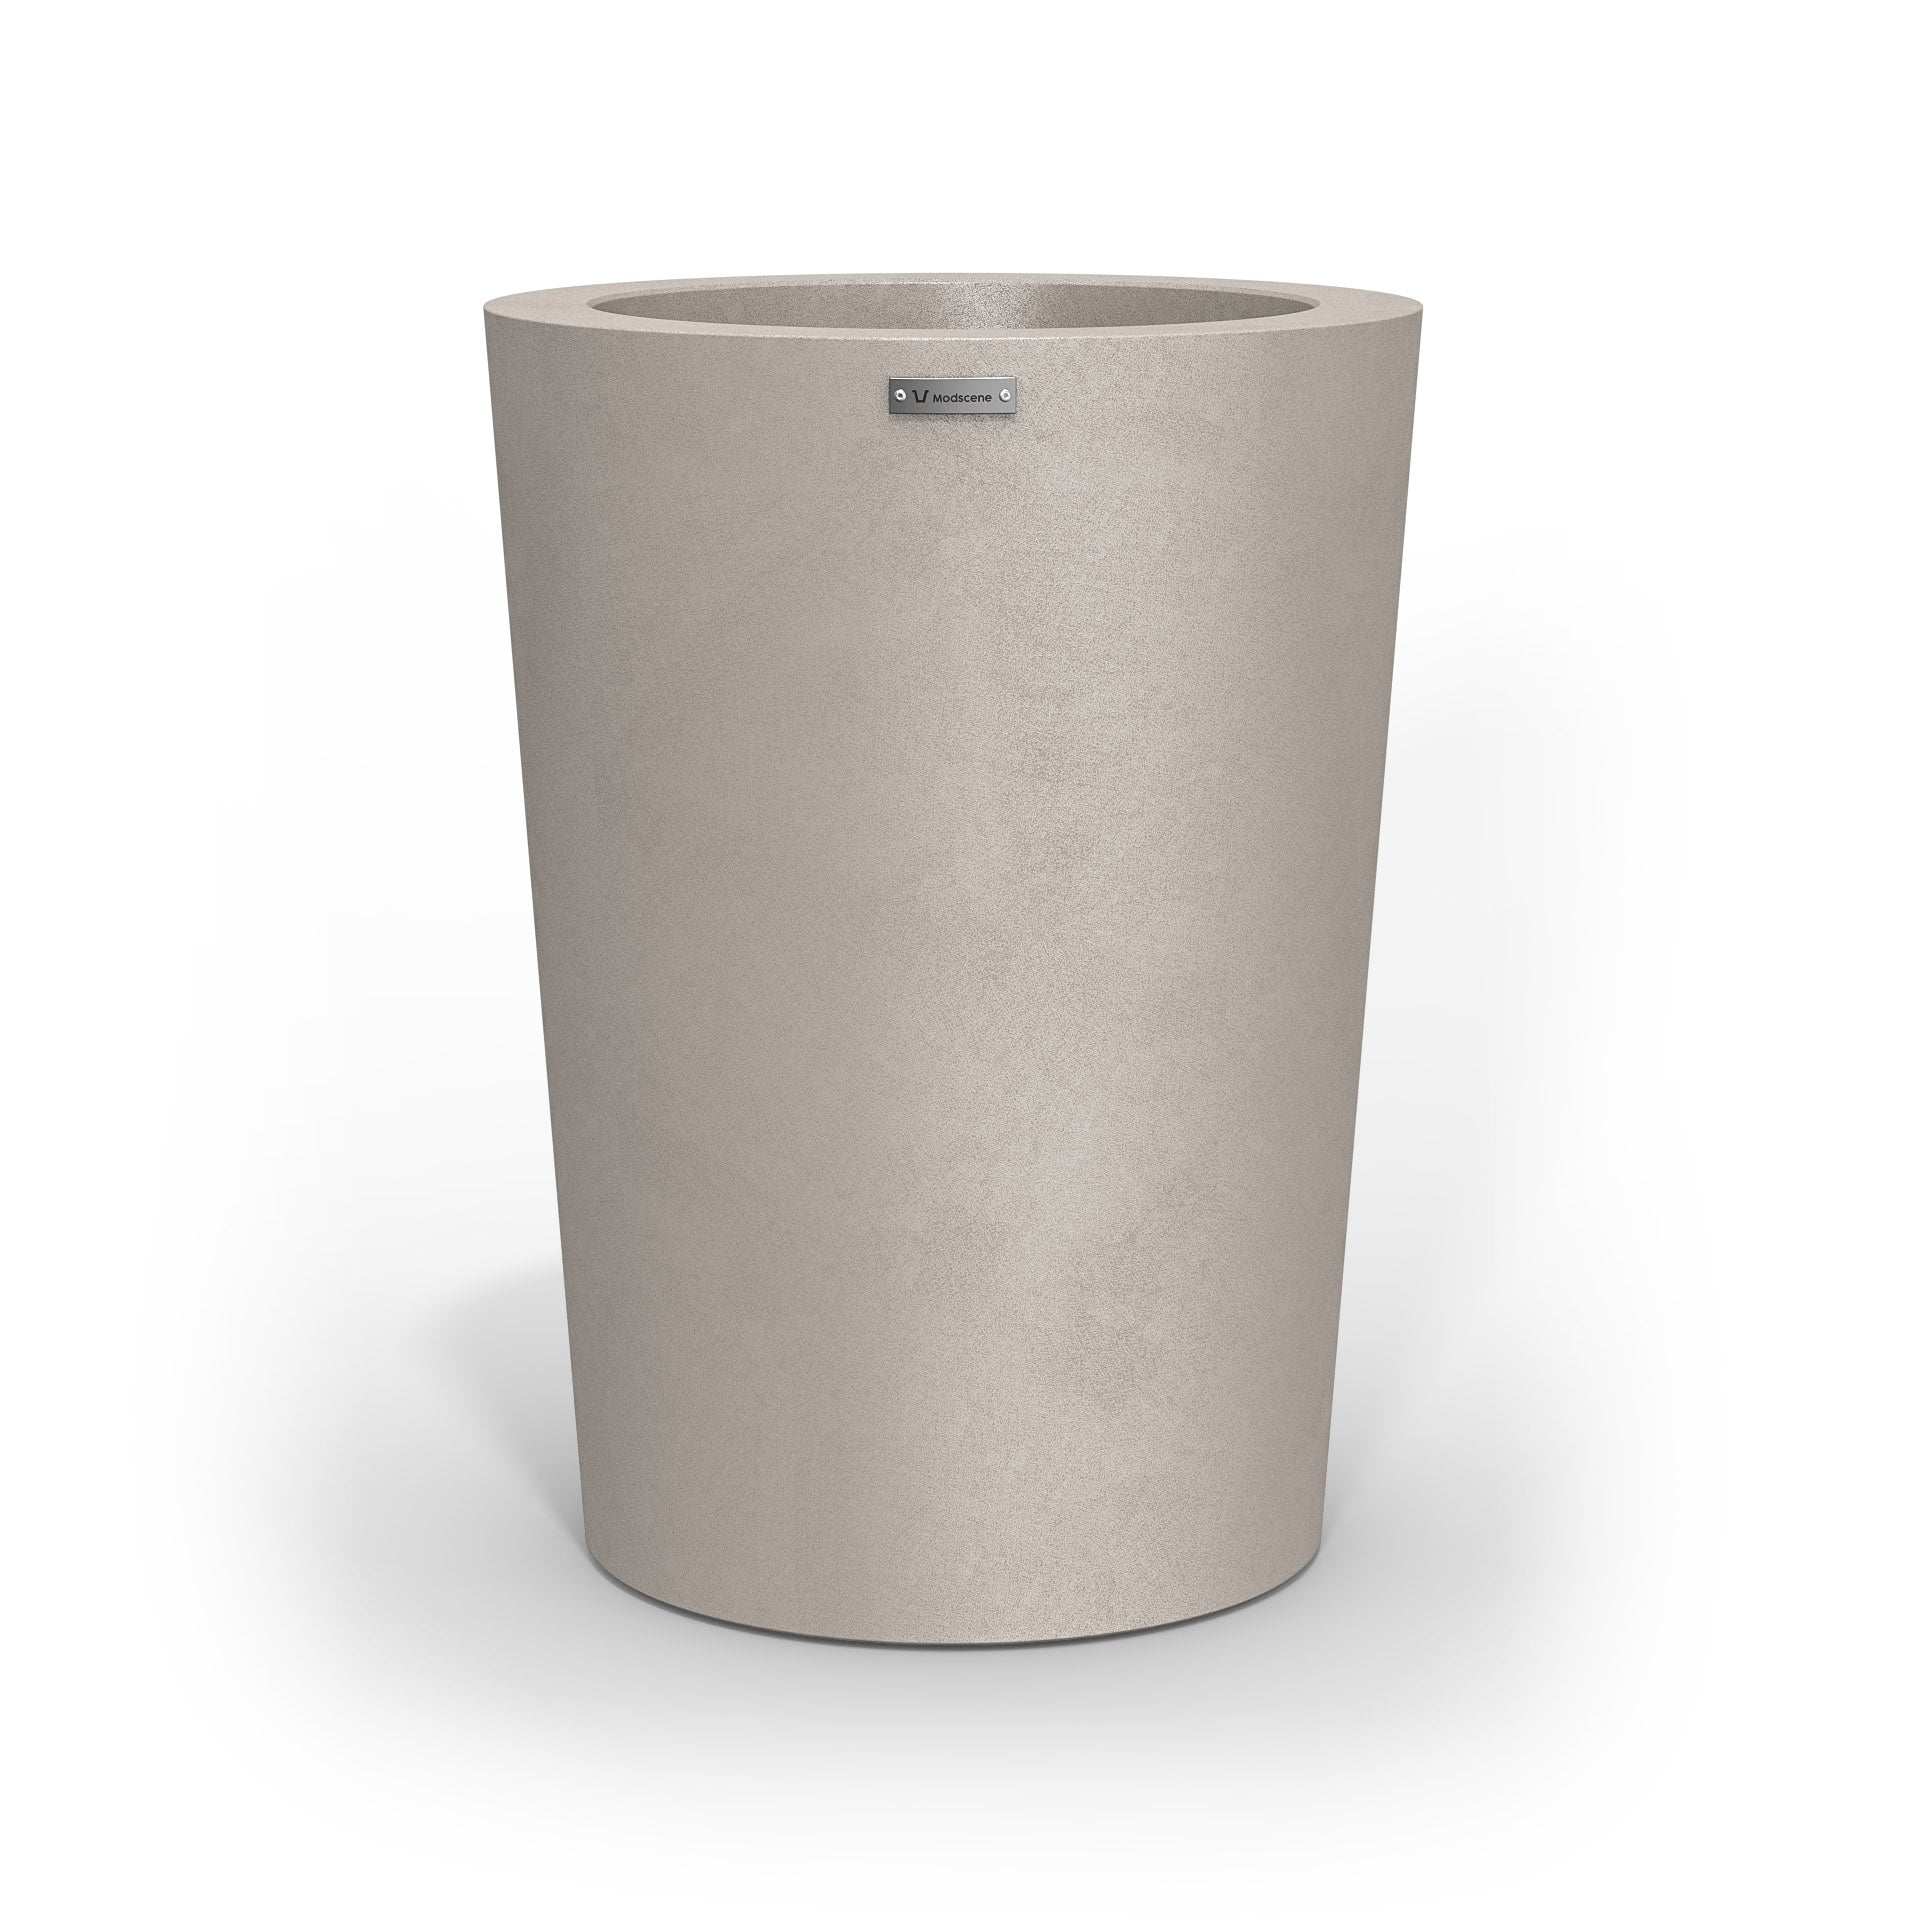 A modern style planter pot in a brushed sand stone colour.